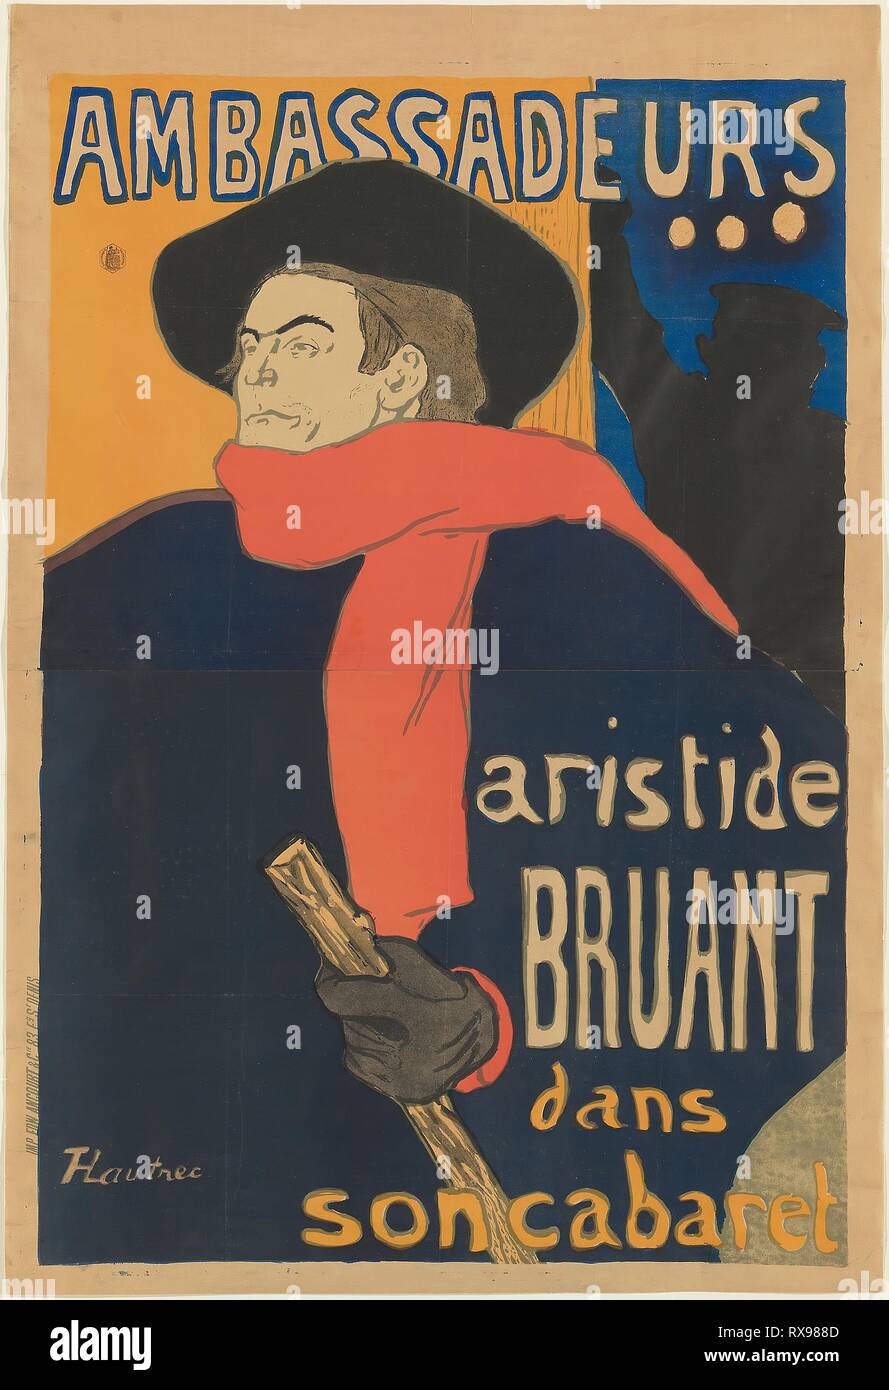 Ambassadeurs: Aristide Bruant. Henri de Toulouse-Lautrec; French, 1864-1901. Date: 1892. Dimensions: 1,390 × 952 mm (image, incl. stray marks); 1,472 × 999 mm (total with both sheets). Color lithograph on tan wove paper. Origin: France. Museum: The Chicago Art Institute. Stock Photo